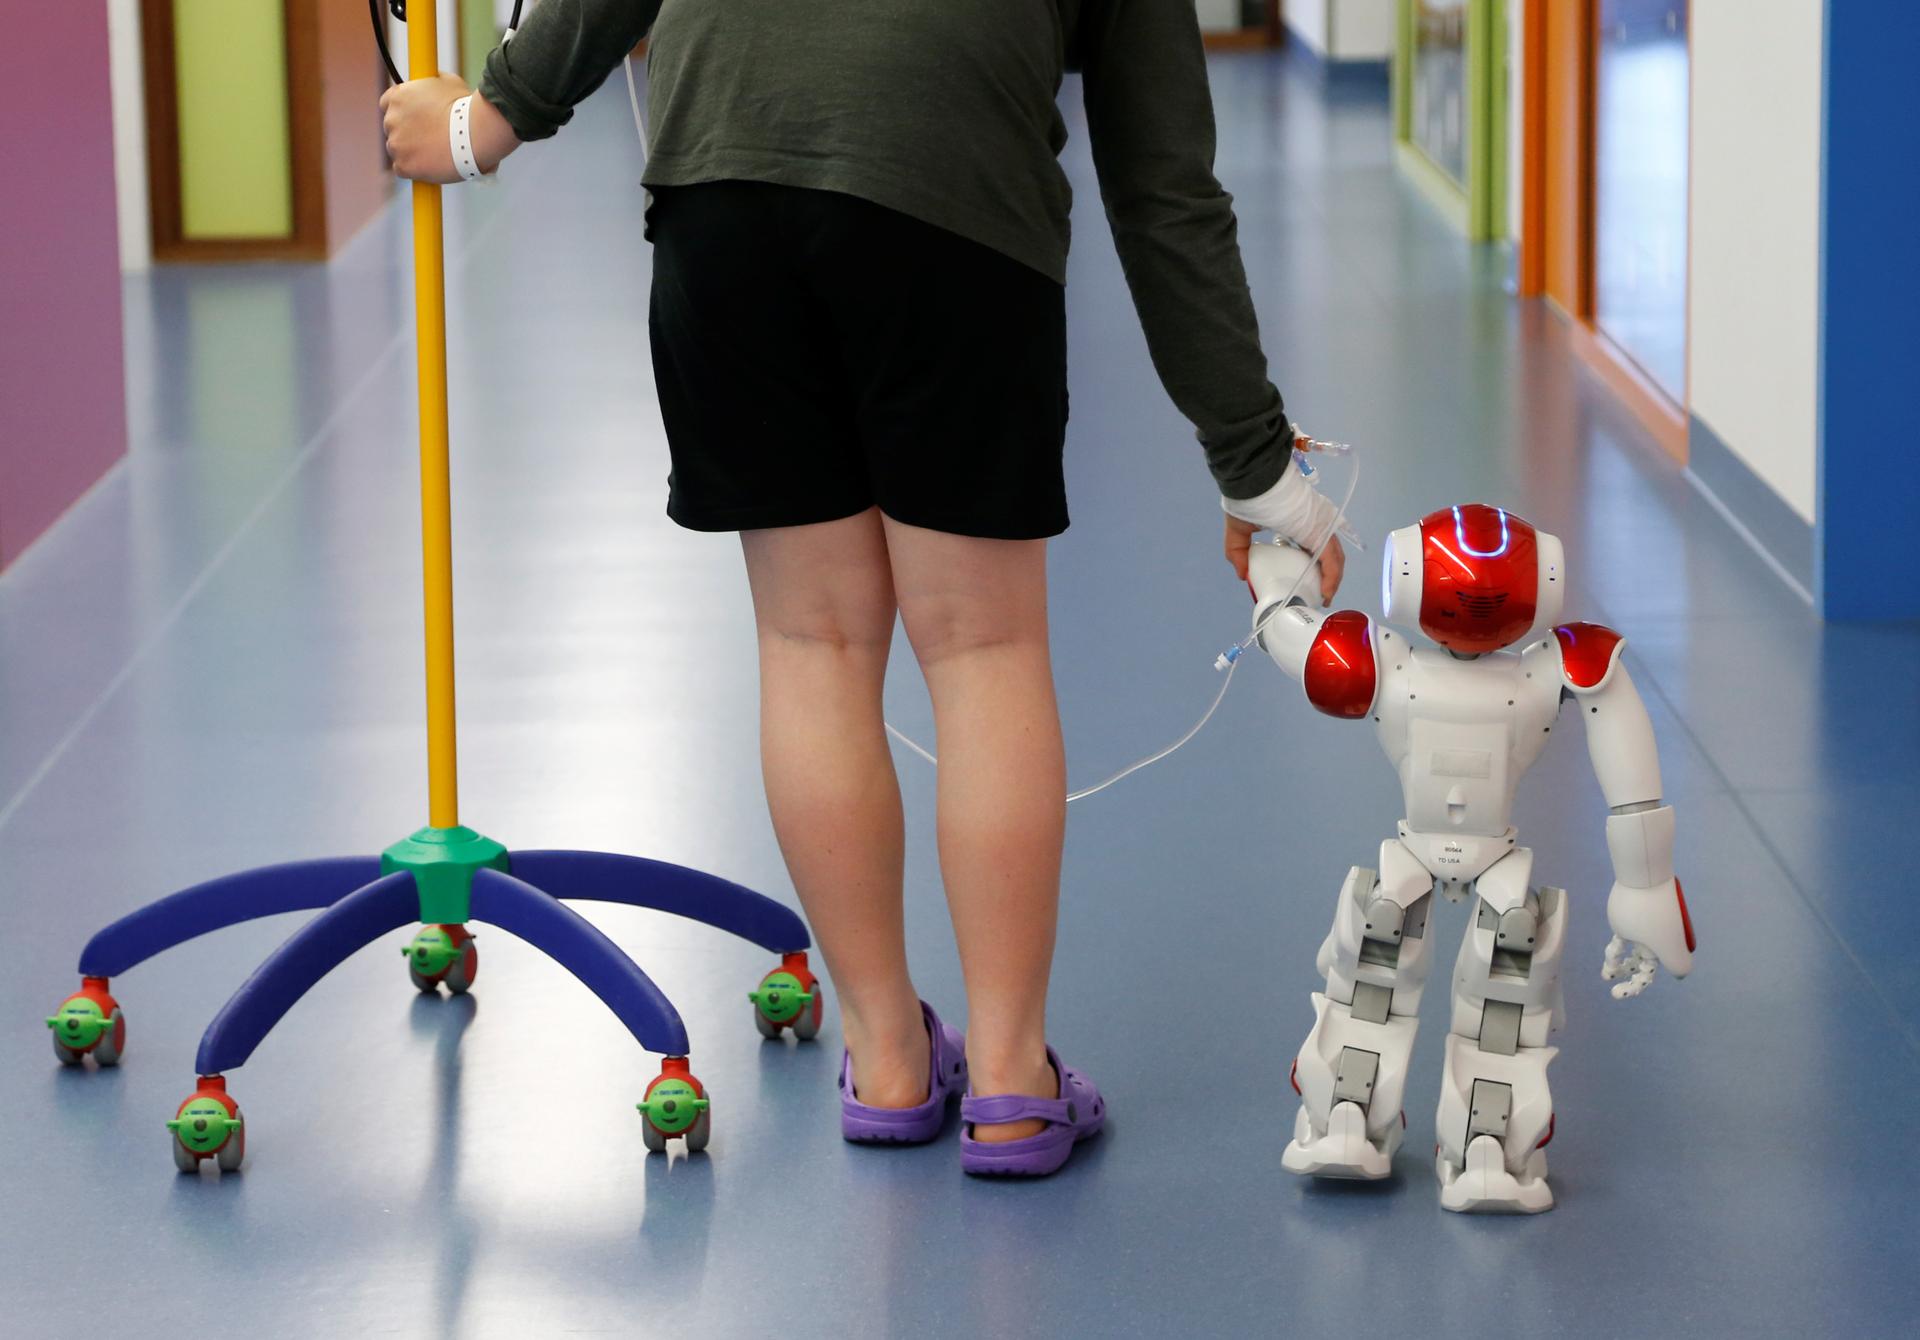 Belgian Ian Frejean, 11, walks with "Zora" the robot, a humanoid robot designed to entertain patients and to support care providers, at AZ Damiaan hospital in Ostend, Belgium June 16, 2016.